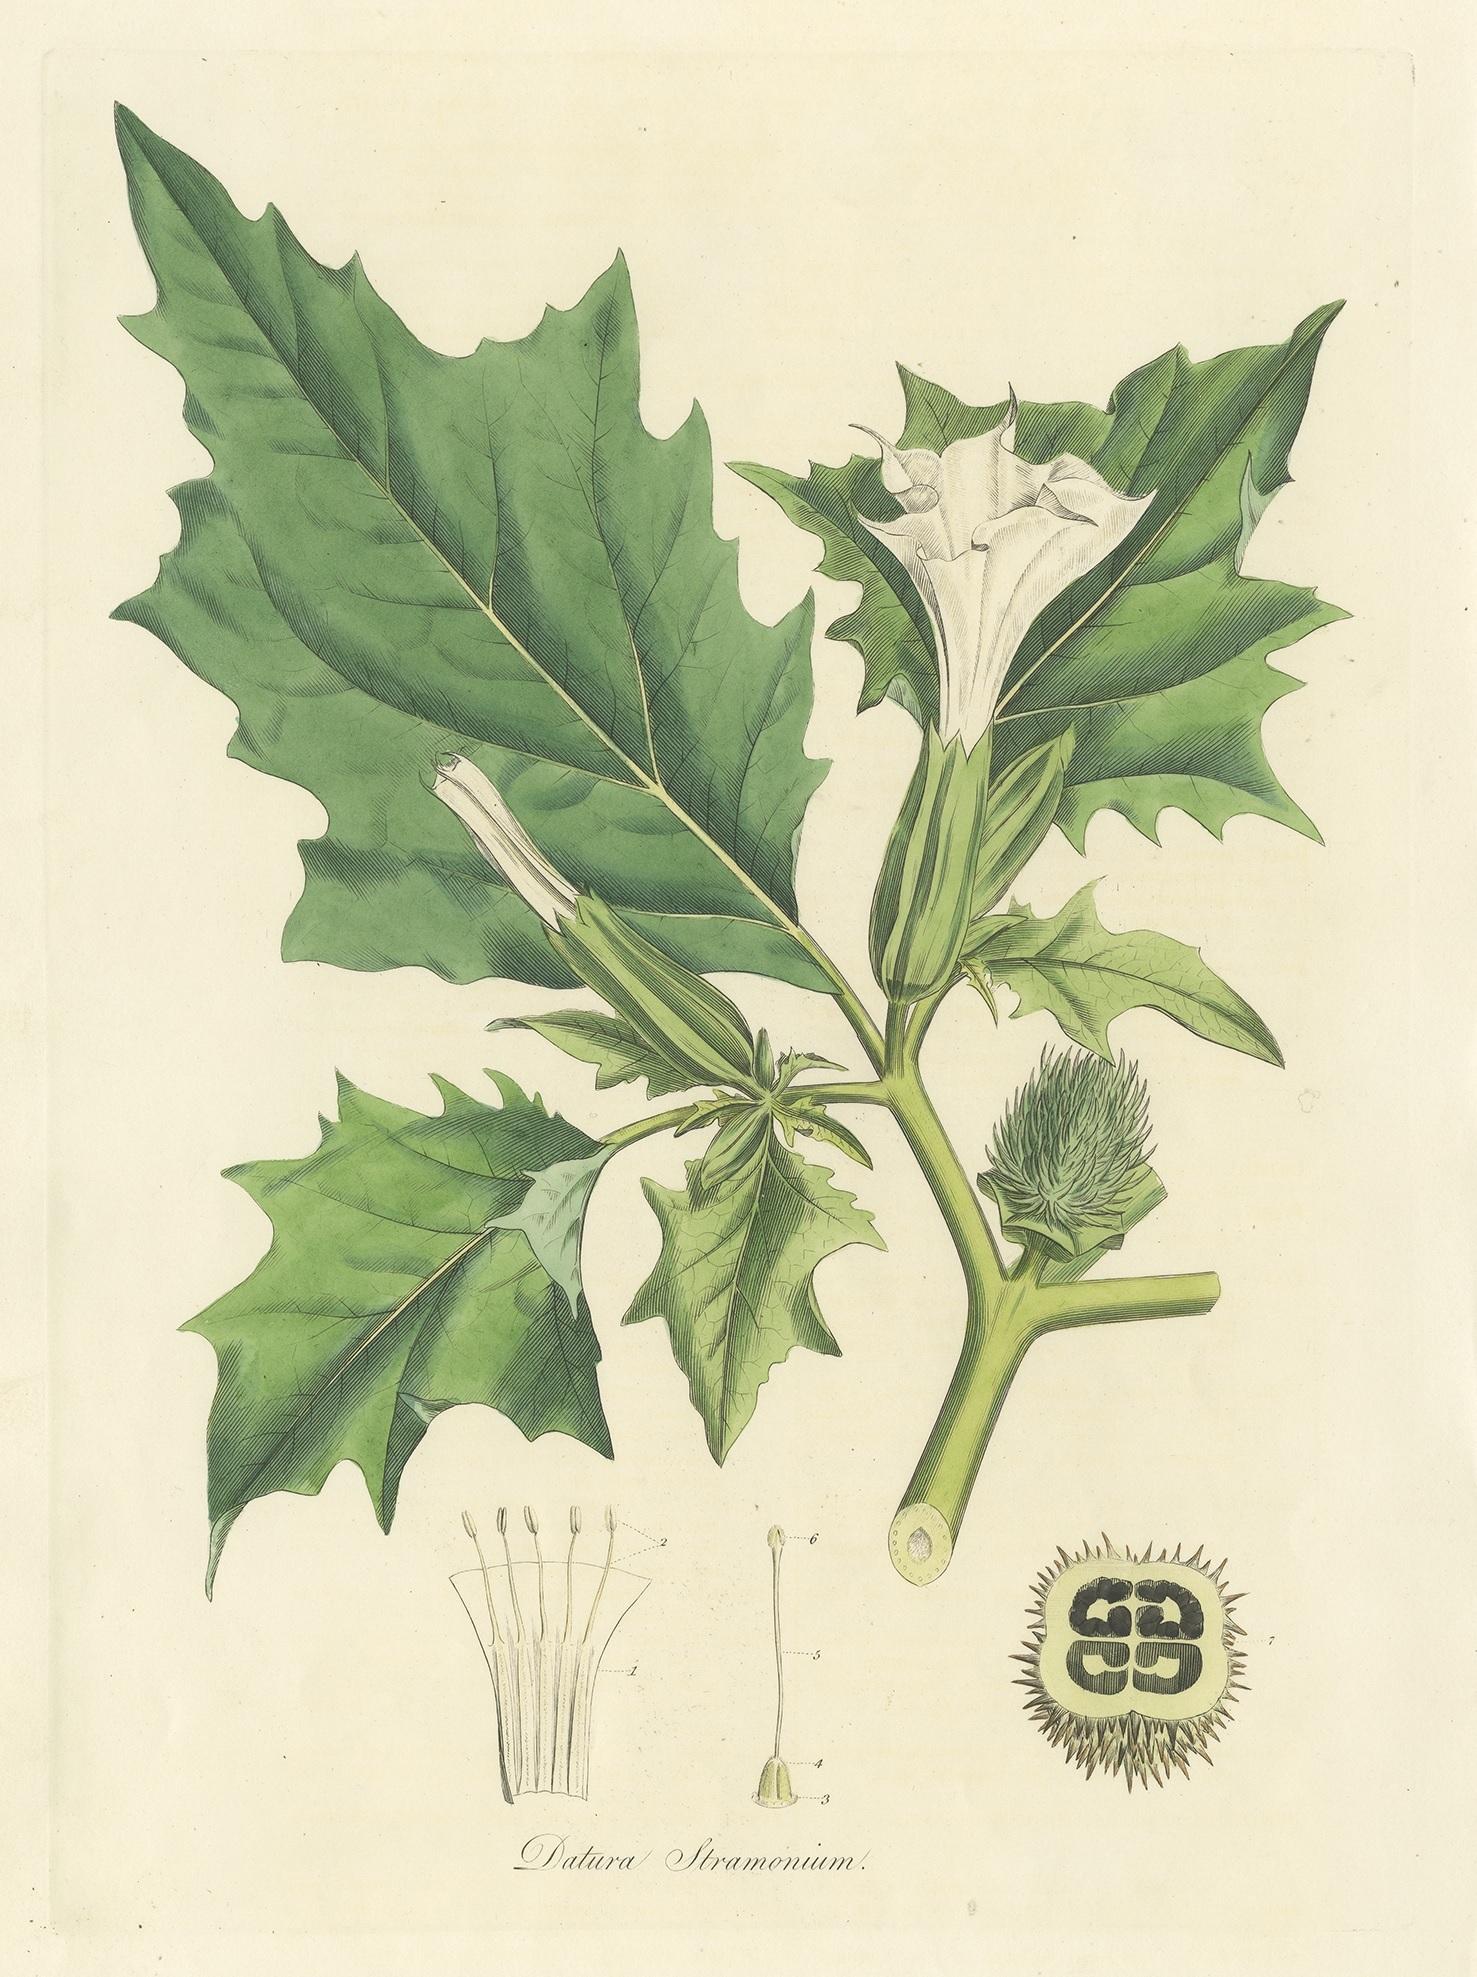 Antique botany print titled 'Datura Stramonium'. Hand colored engraving of datura stramonium, known by the common names thorn apple, jimsonweed (jimson weed) or devil's snare. This print originates from 'Flora Londinensis' by William Curtis.